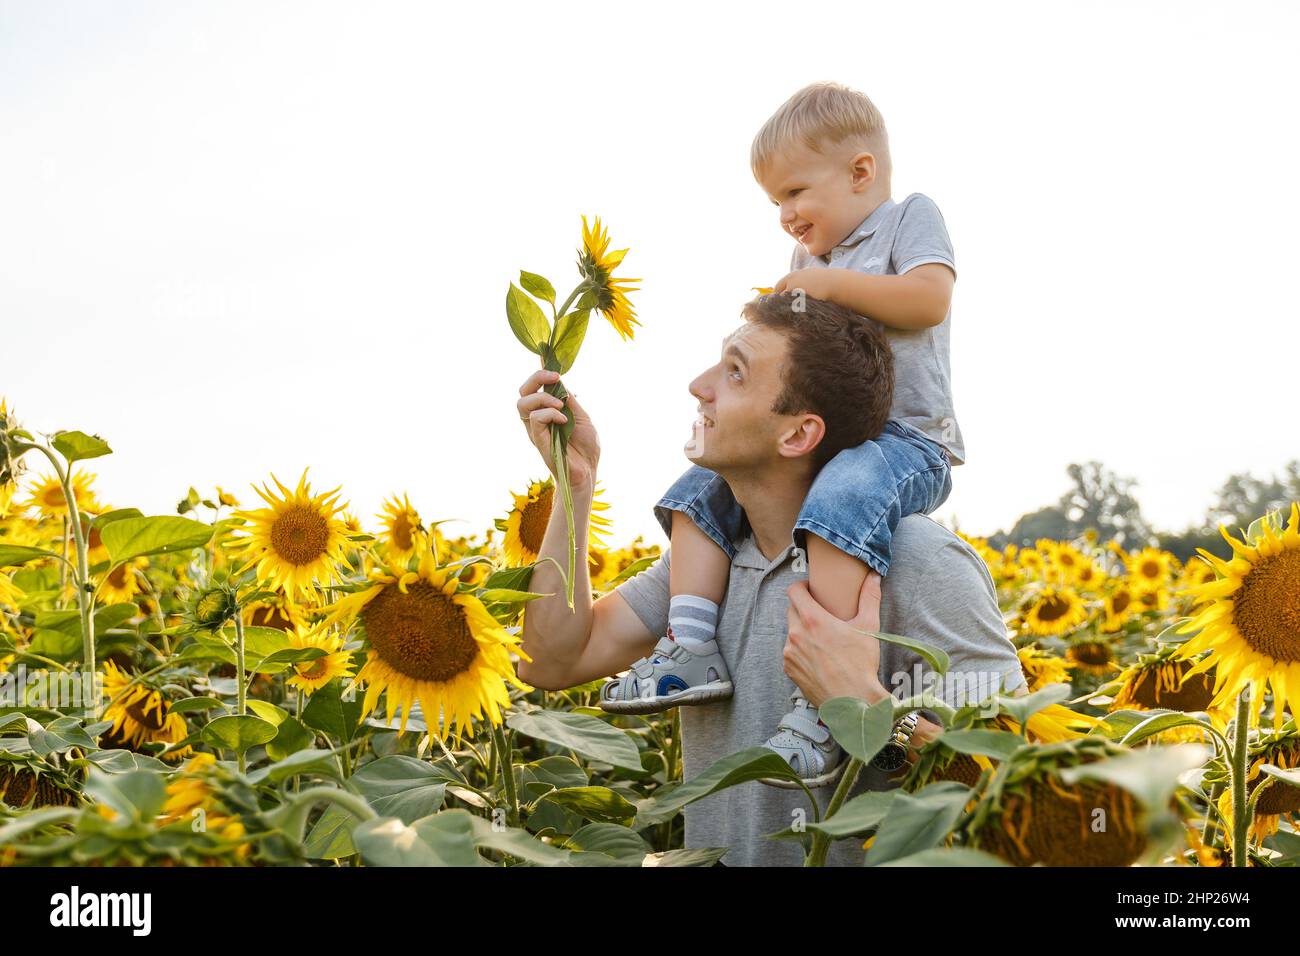 Father and son having fun in field of sunflowers. Little boy sitting on his dad shoulders and smiling. Summer outdoors lifestyle, family leisure, pare Stock Photo